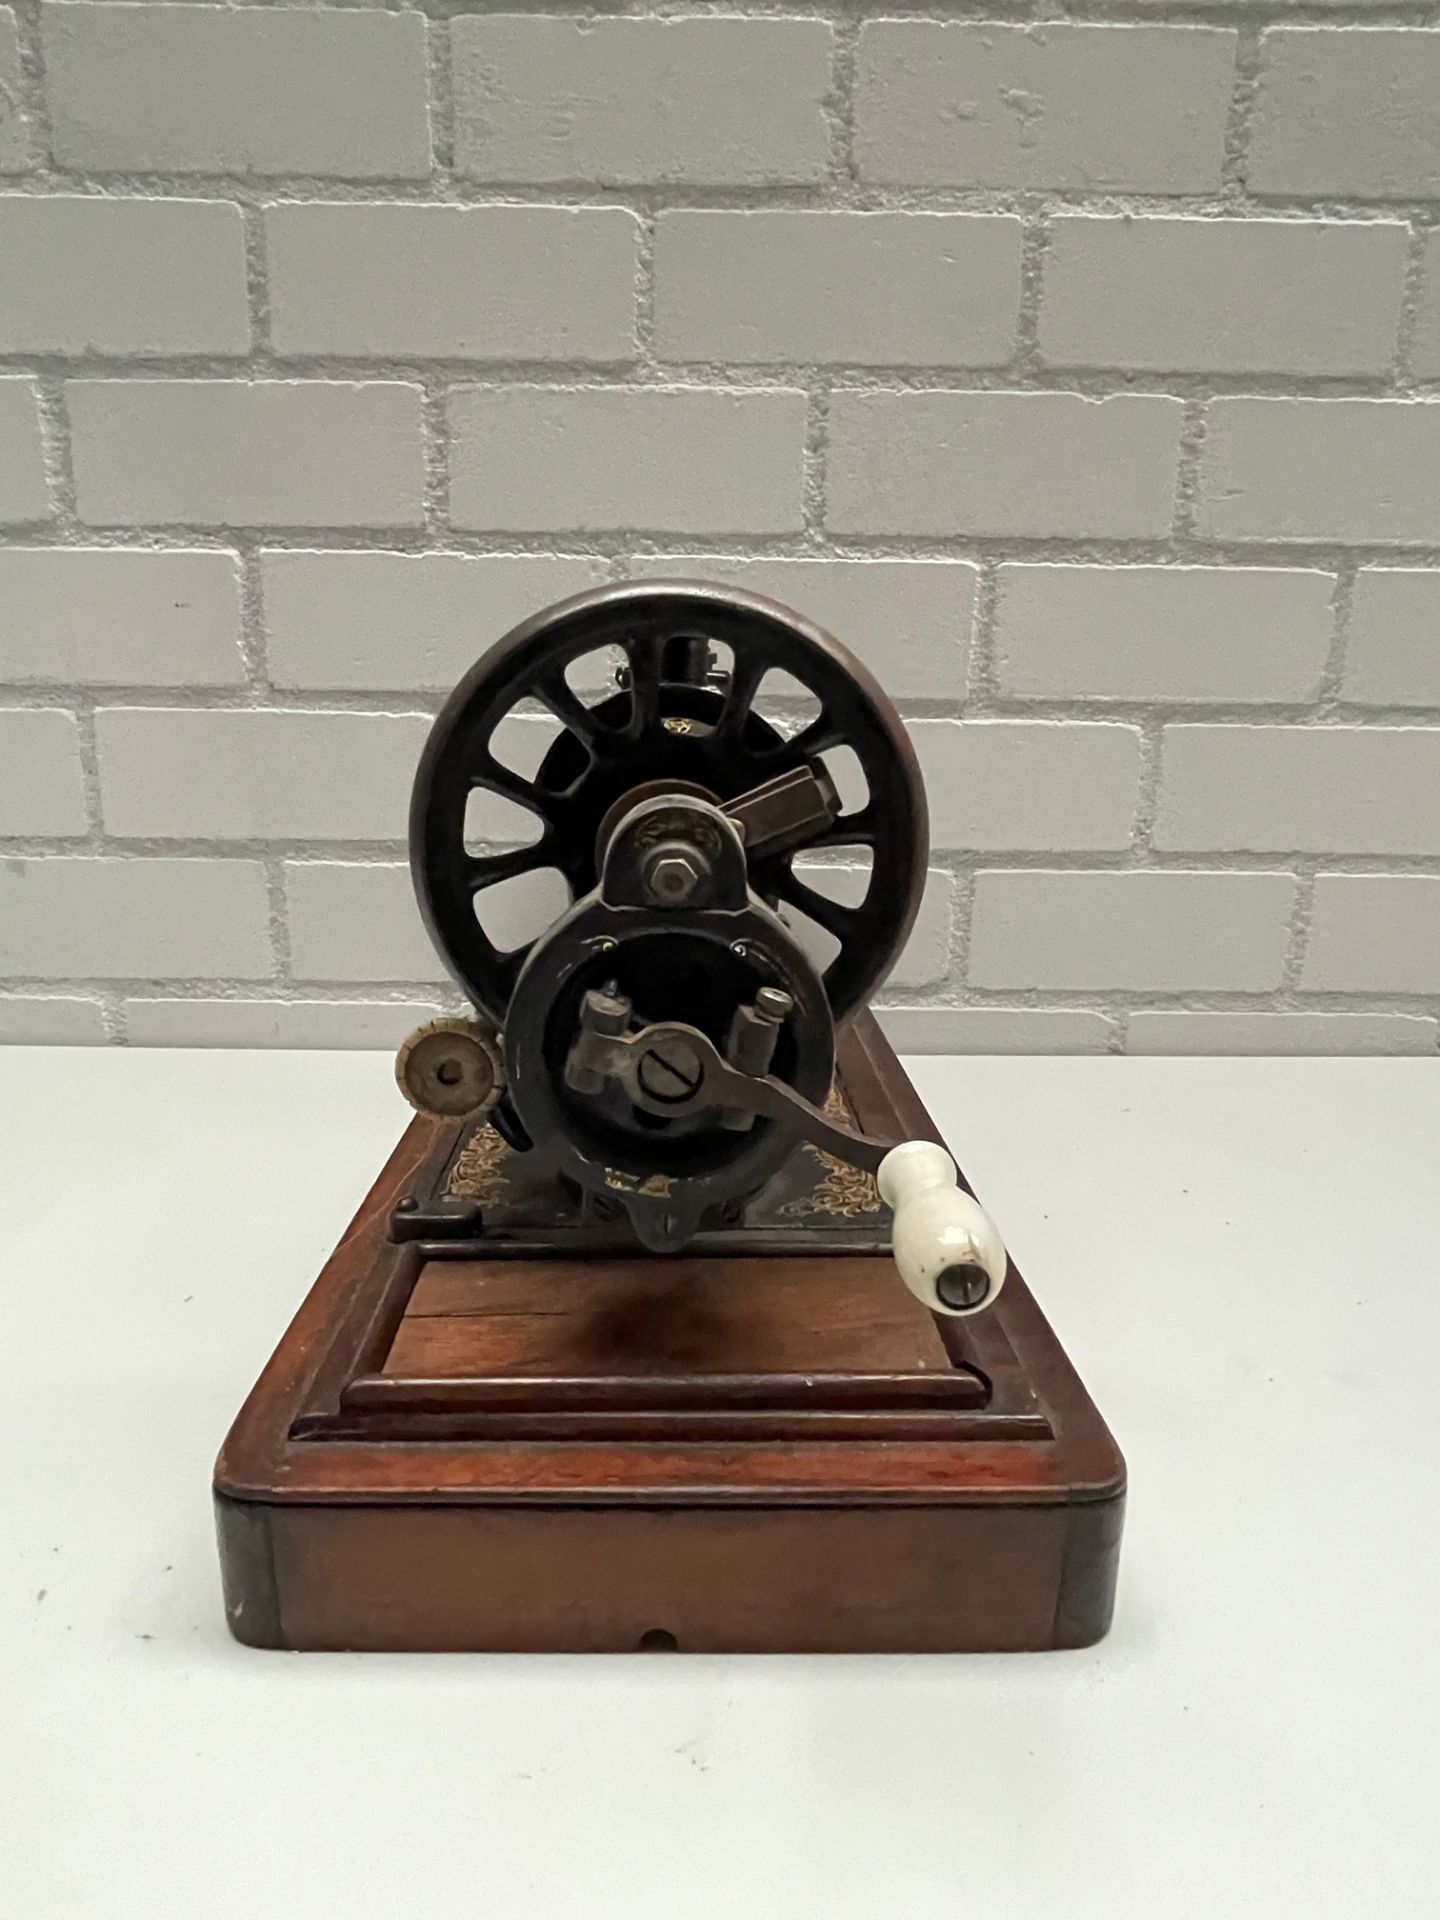 Vintage Cast Iron Sewing Machine - Image 6 of 11